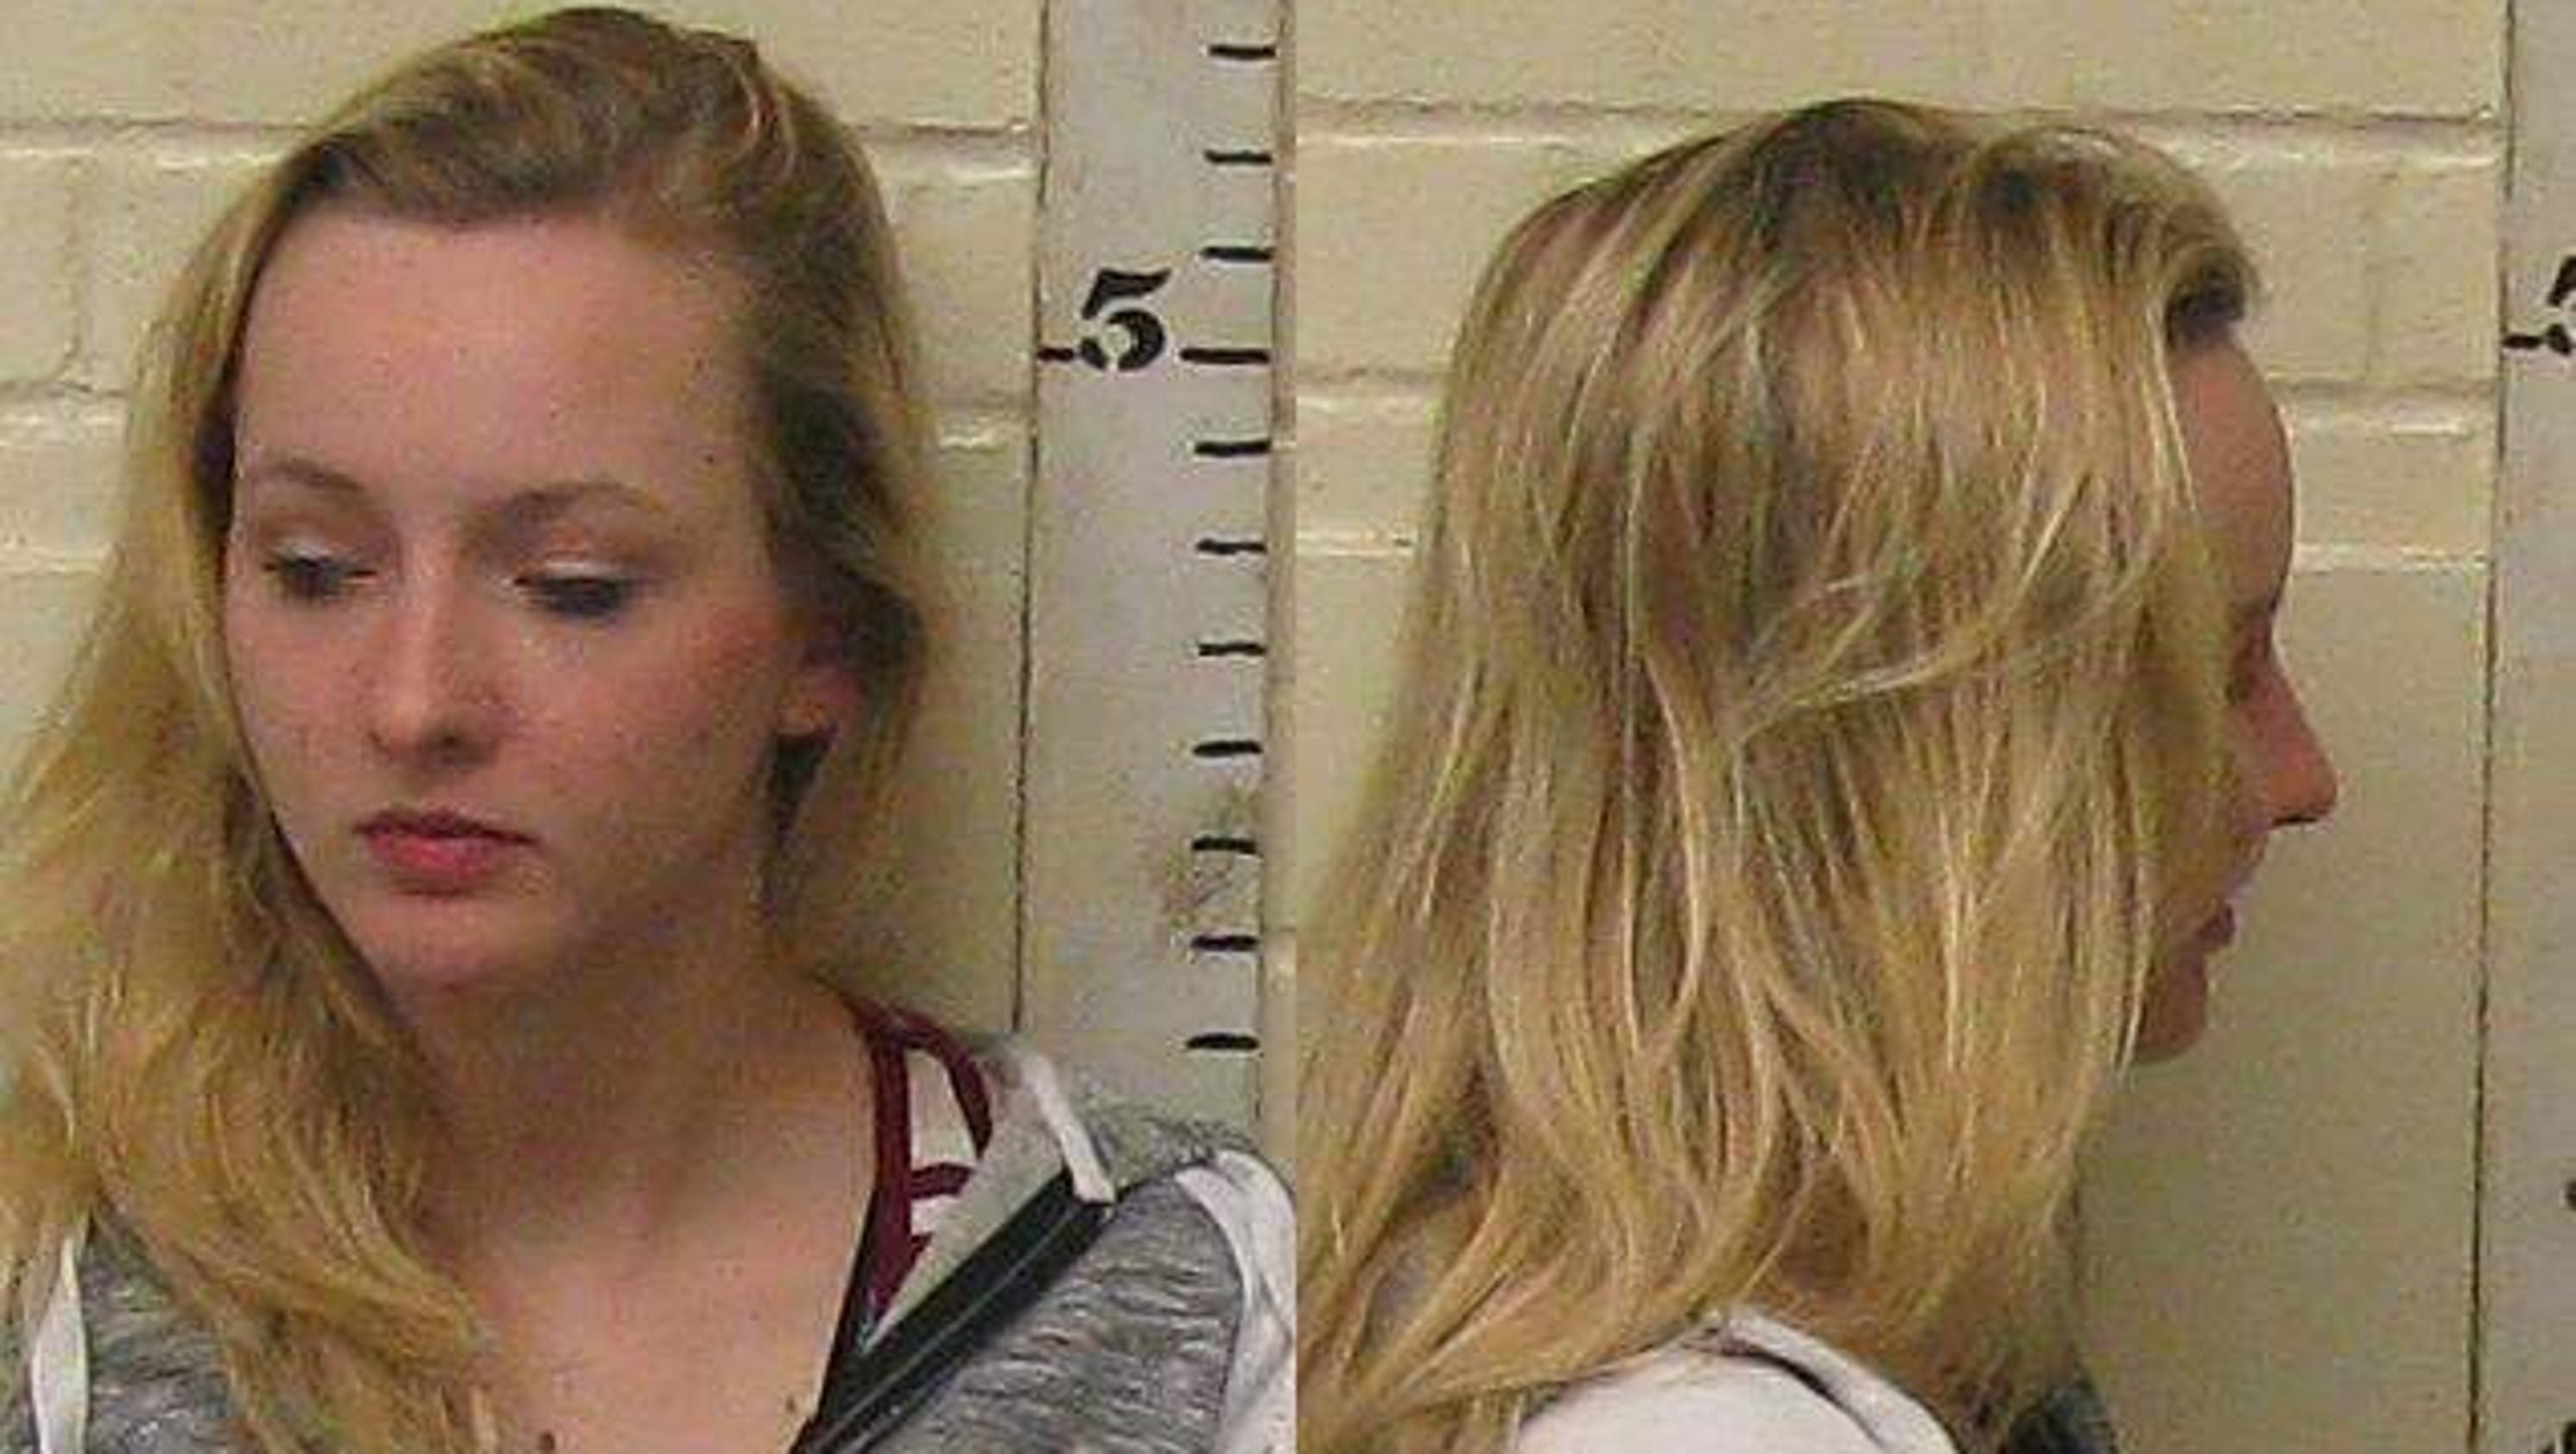 Texas teen who claimed she was raped admits it was a hoax